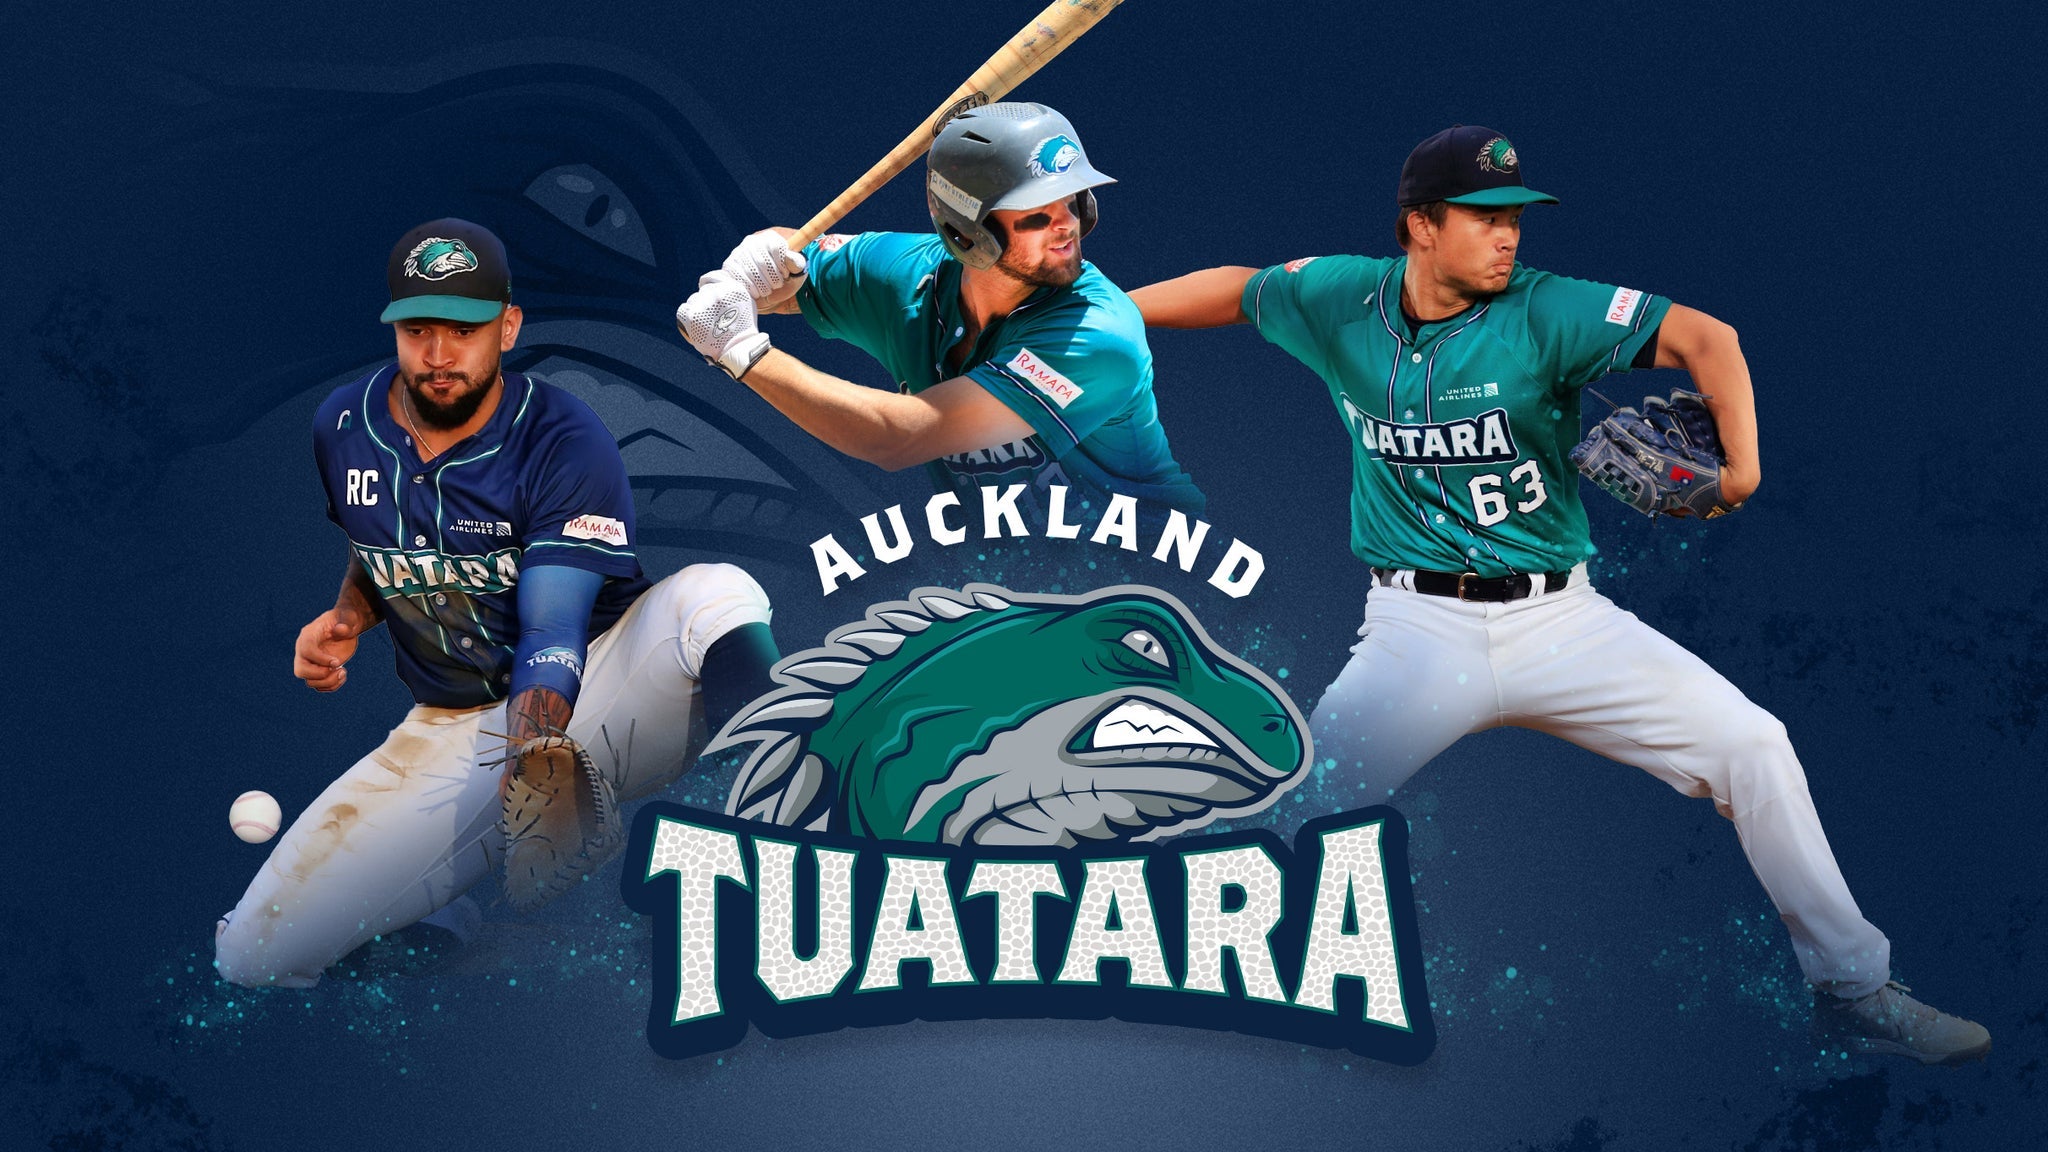 Image used with permission from Ticketmaster | Auckland Tuatara v Adelaide Giants tickets